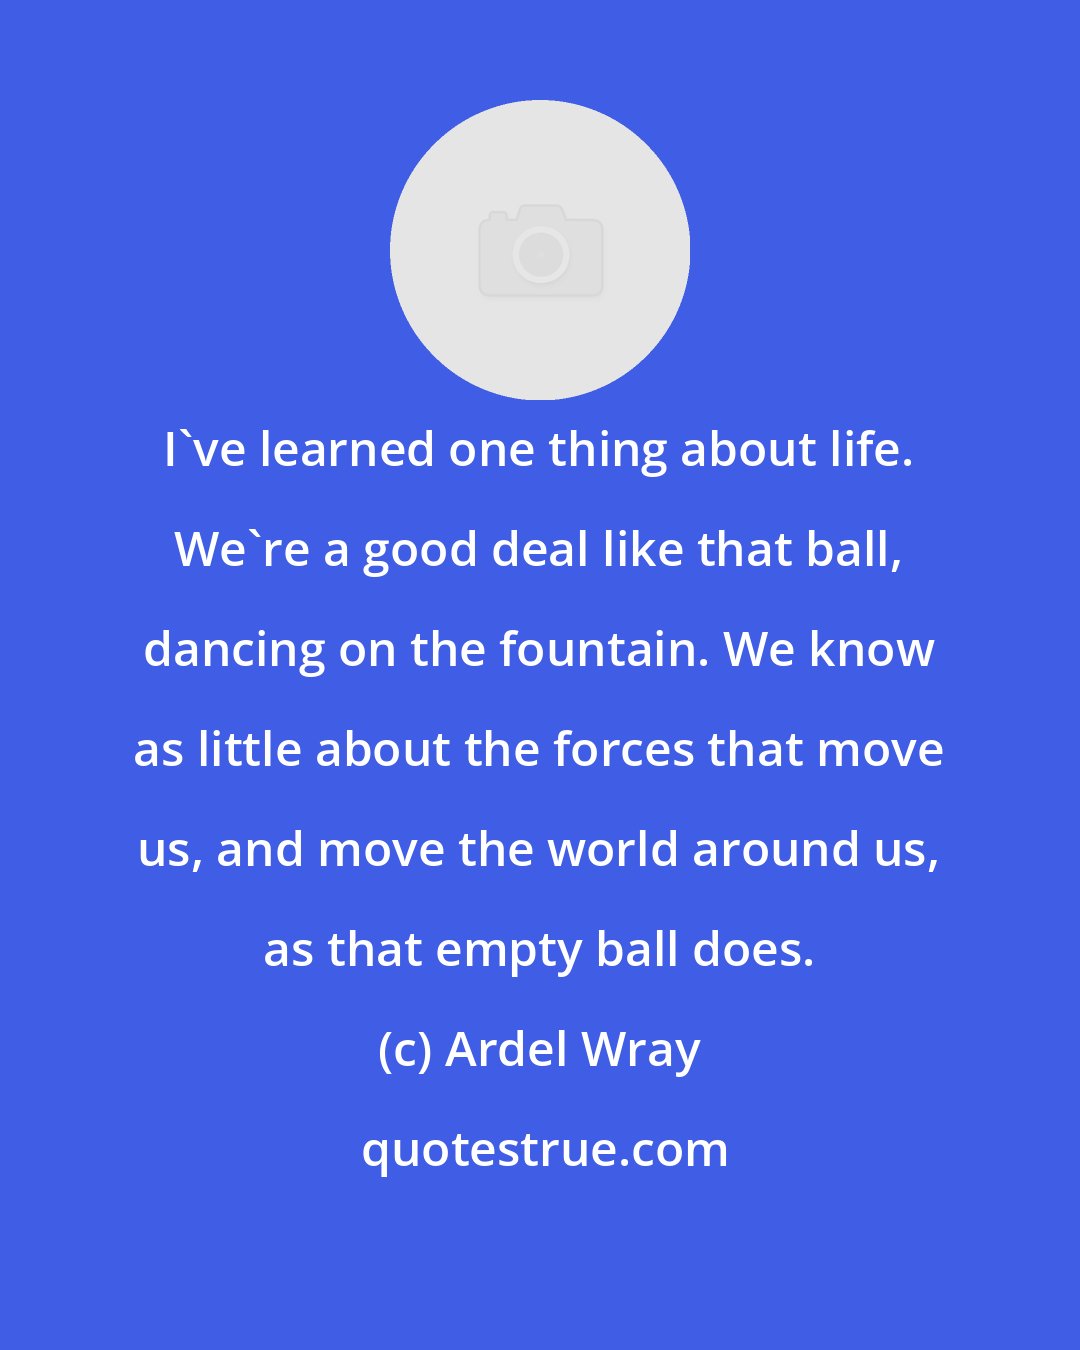 Ardel Wray: I've learned one thing about life. We're a good deal like that ball, dancing on the fountain. We know as little about the forces that move us, and move the world around us, as that empty ball does.